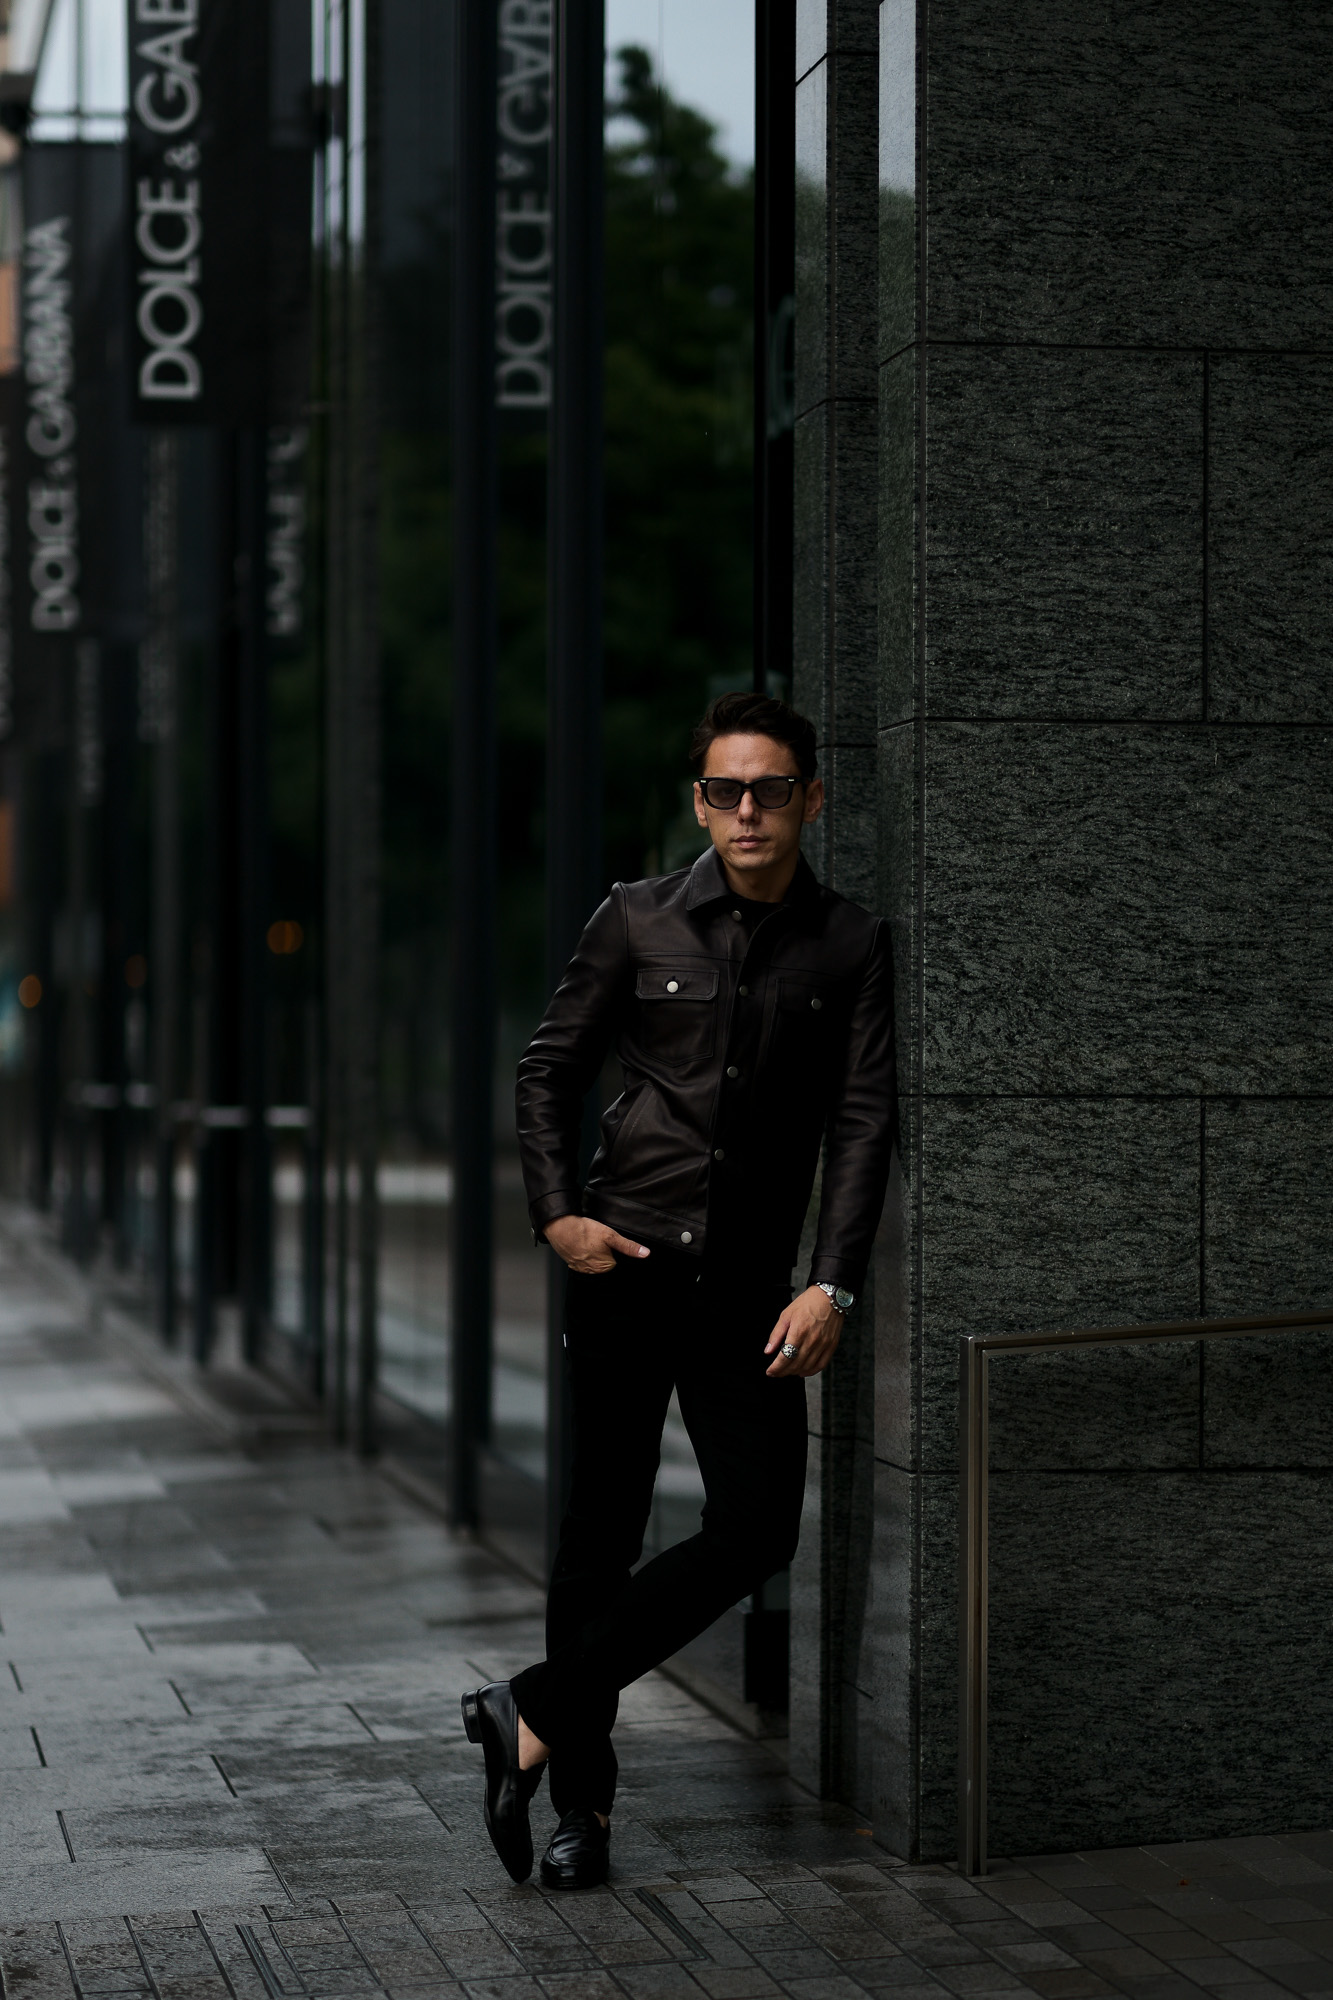 MOLEC (モレック) 3rd type Leather Jacket (3rdタイプ レザー